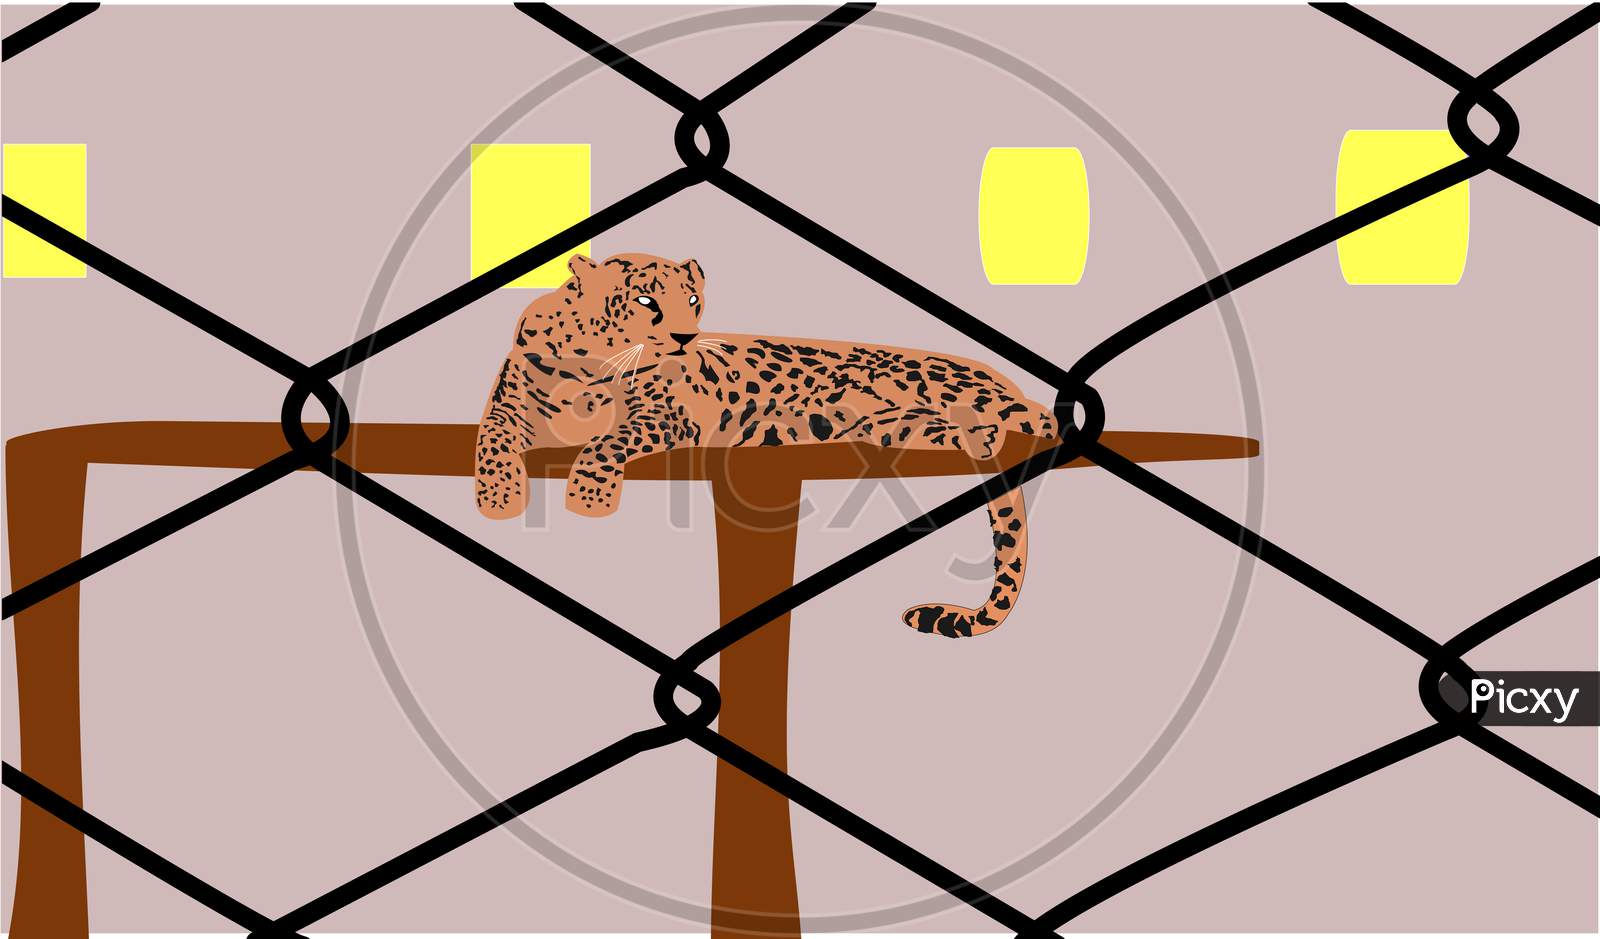 Illustration Graphic Of A Big Cat Sitting On The Wooden Table Inside The Wire Cage.